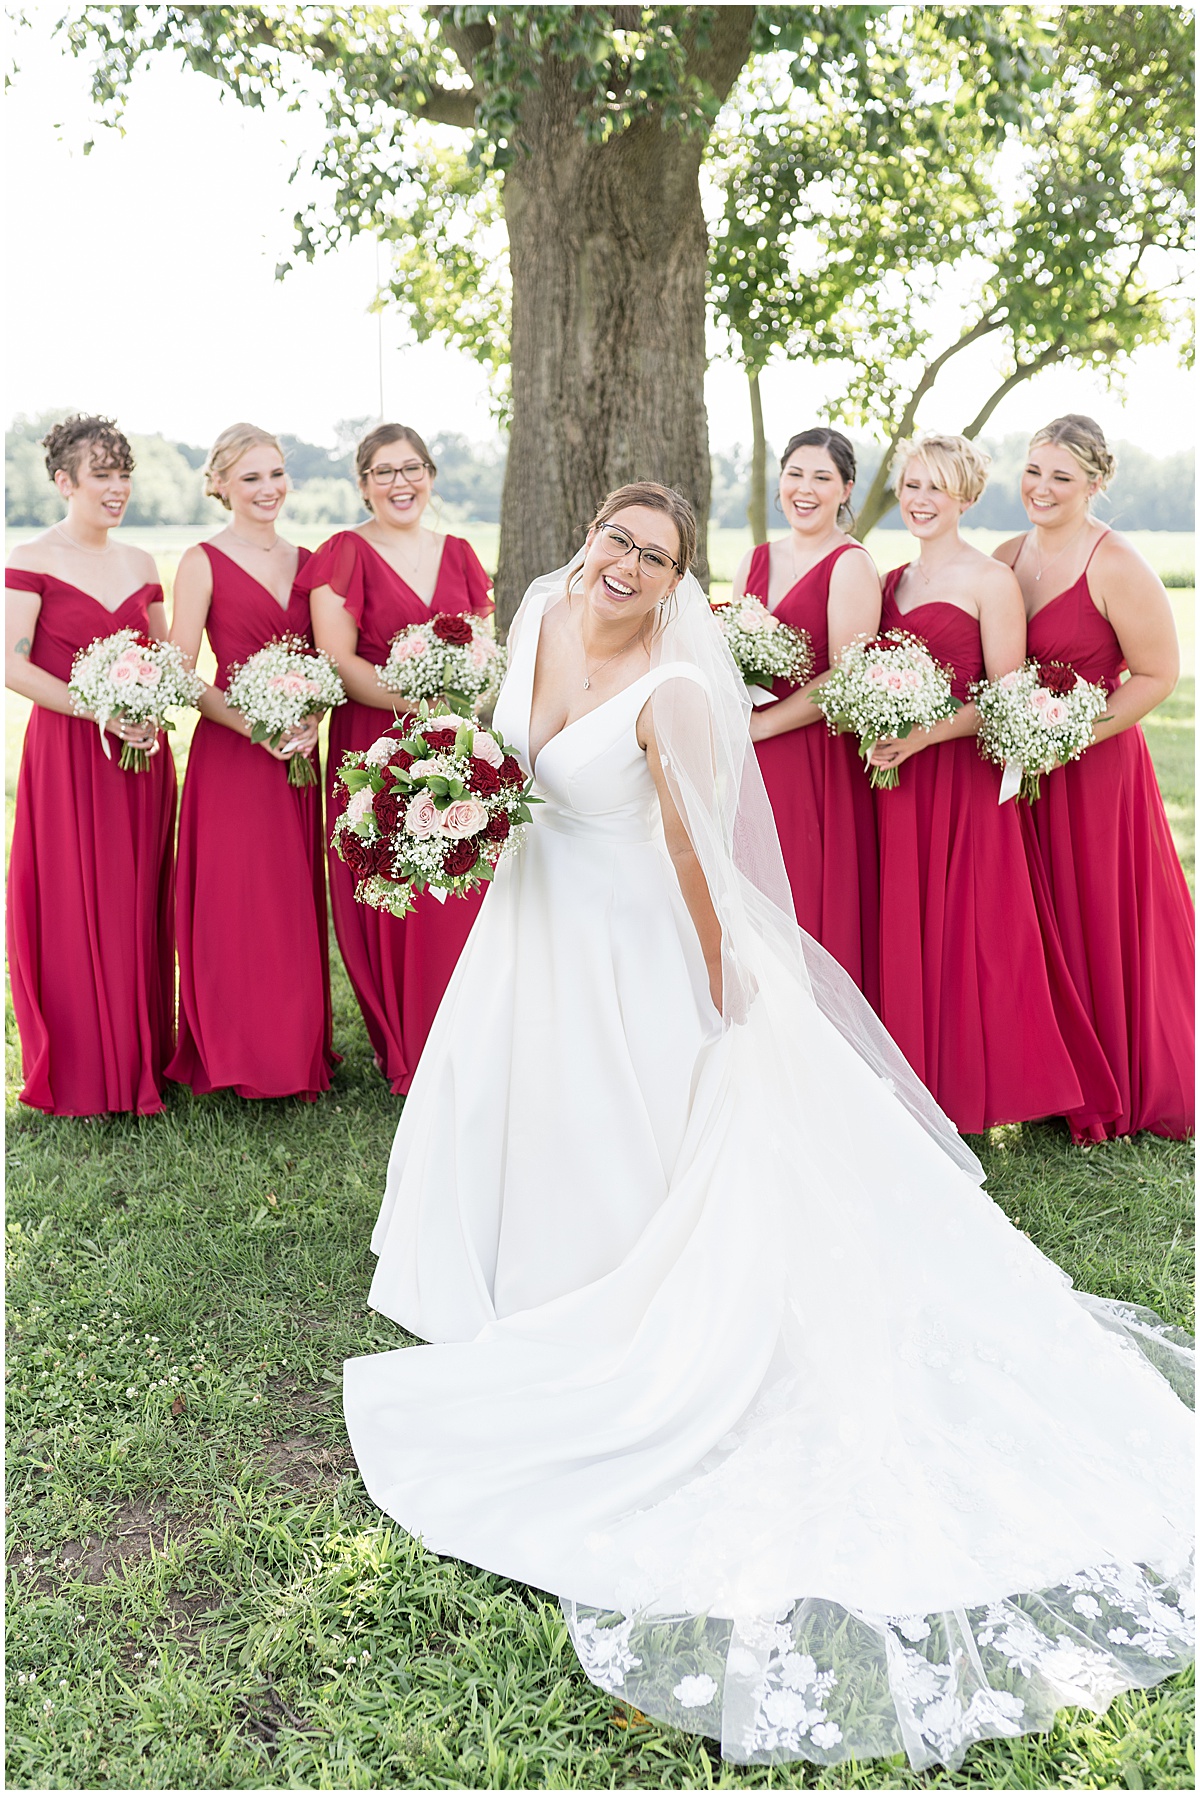 Bride shows off dress in front of bridesmaids at Churchill Farms wedding in Lake Village, Indiana photographed by Victoria Rayburn Photography